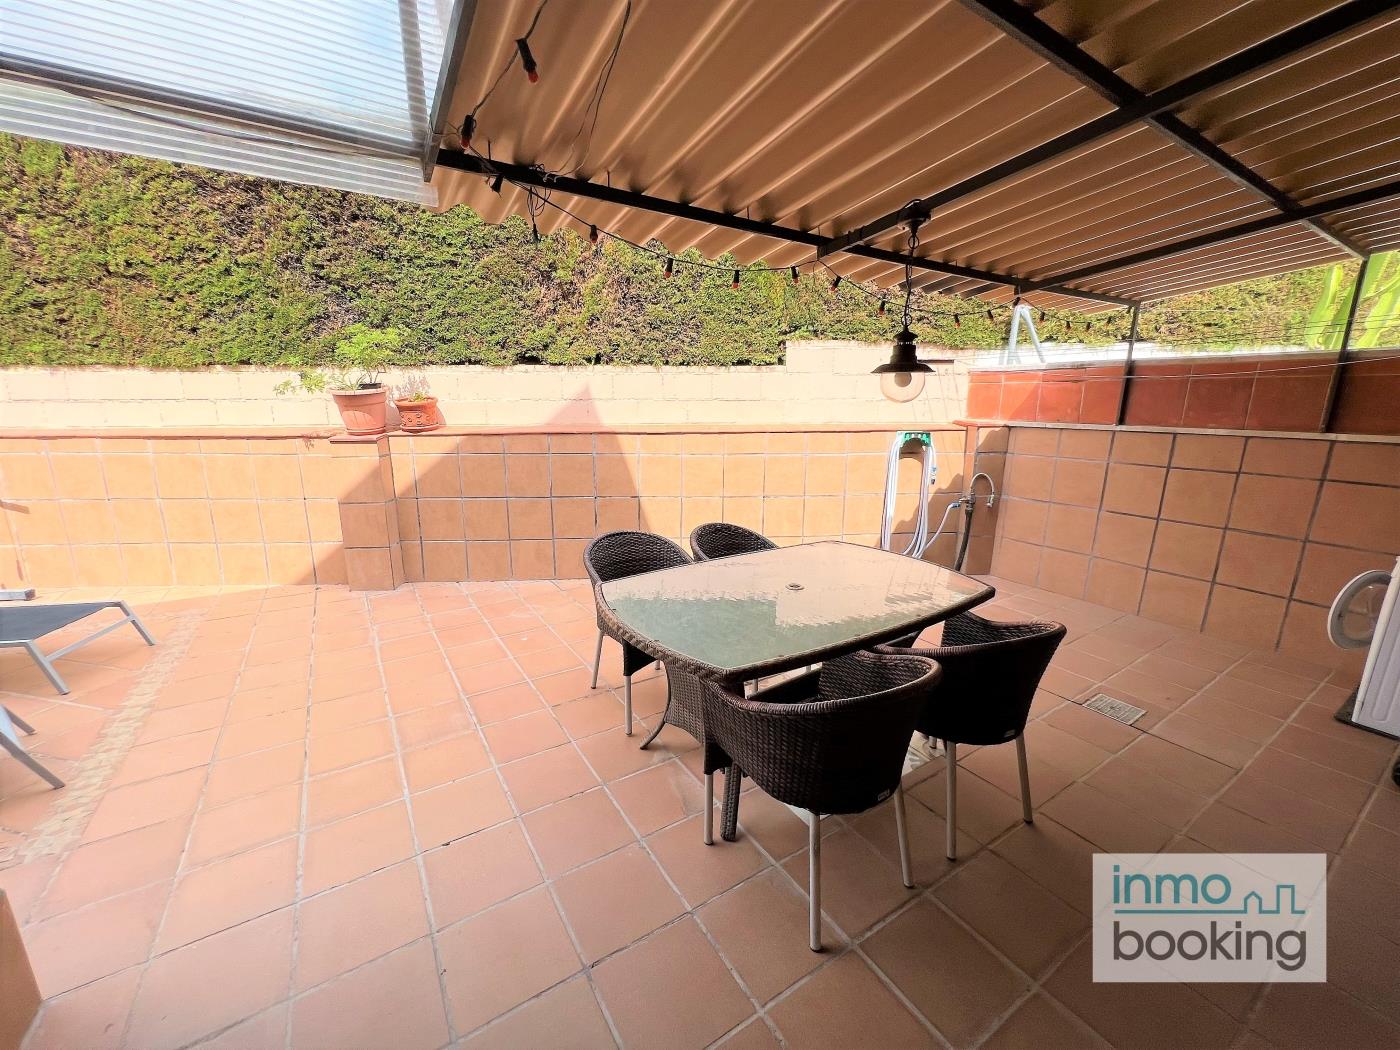 Inmobooking Single-family house Salou, air-conditioned. in salou